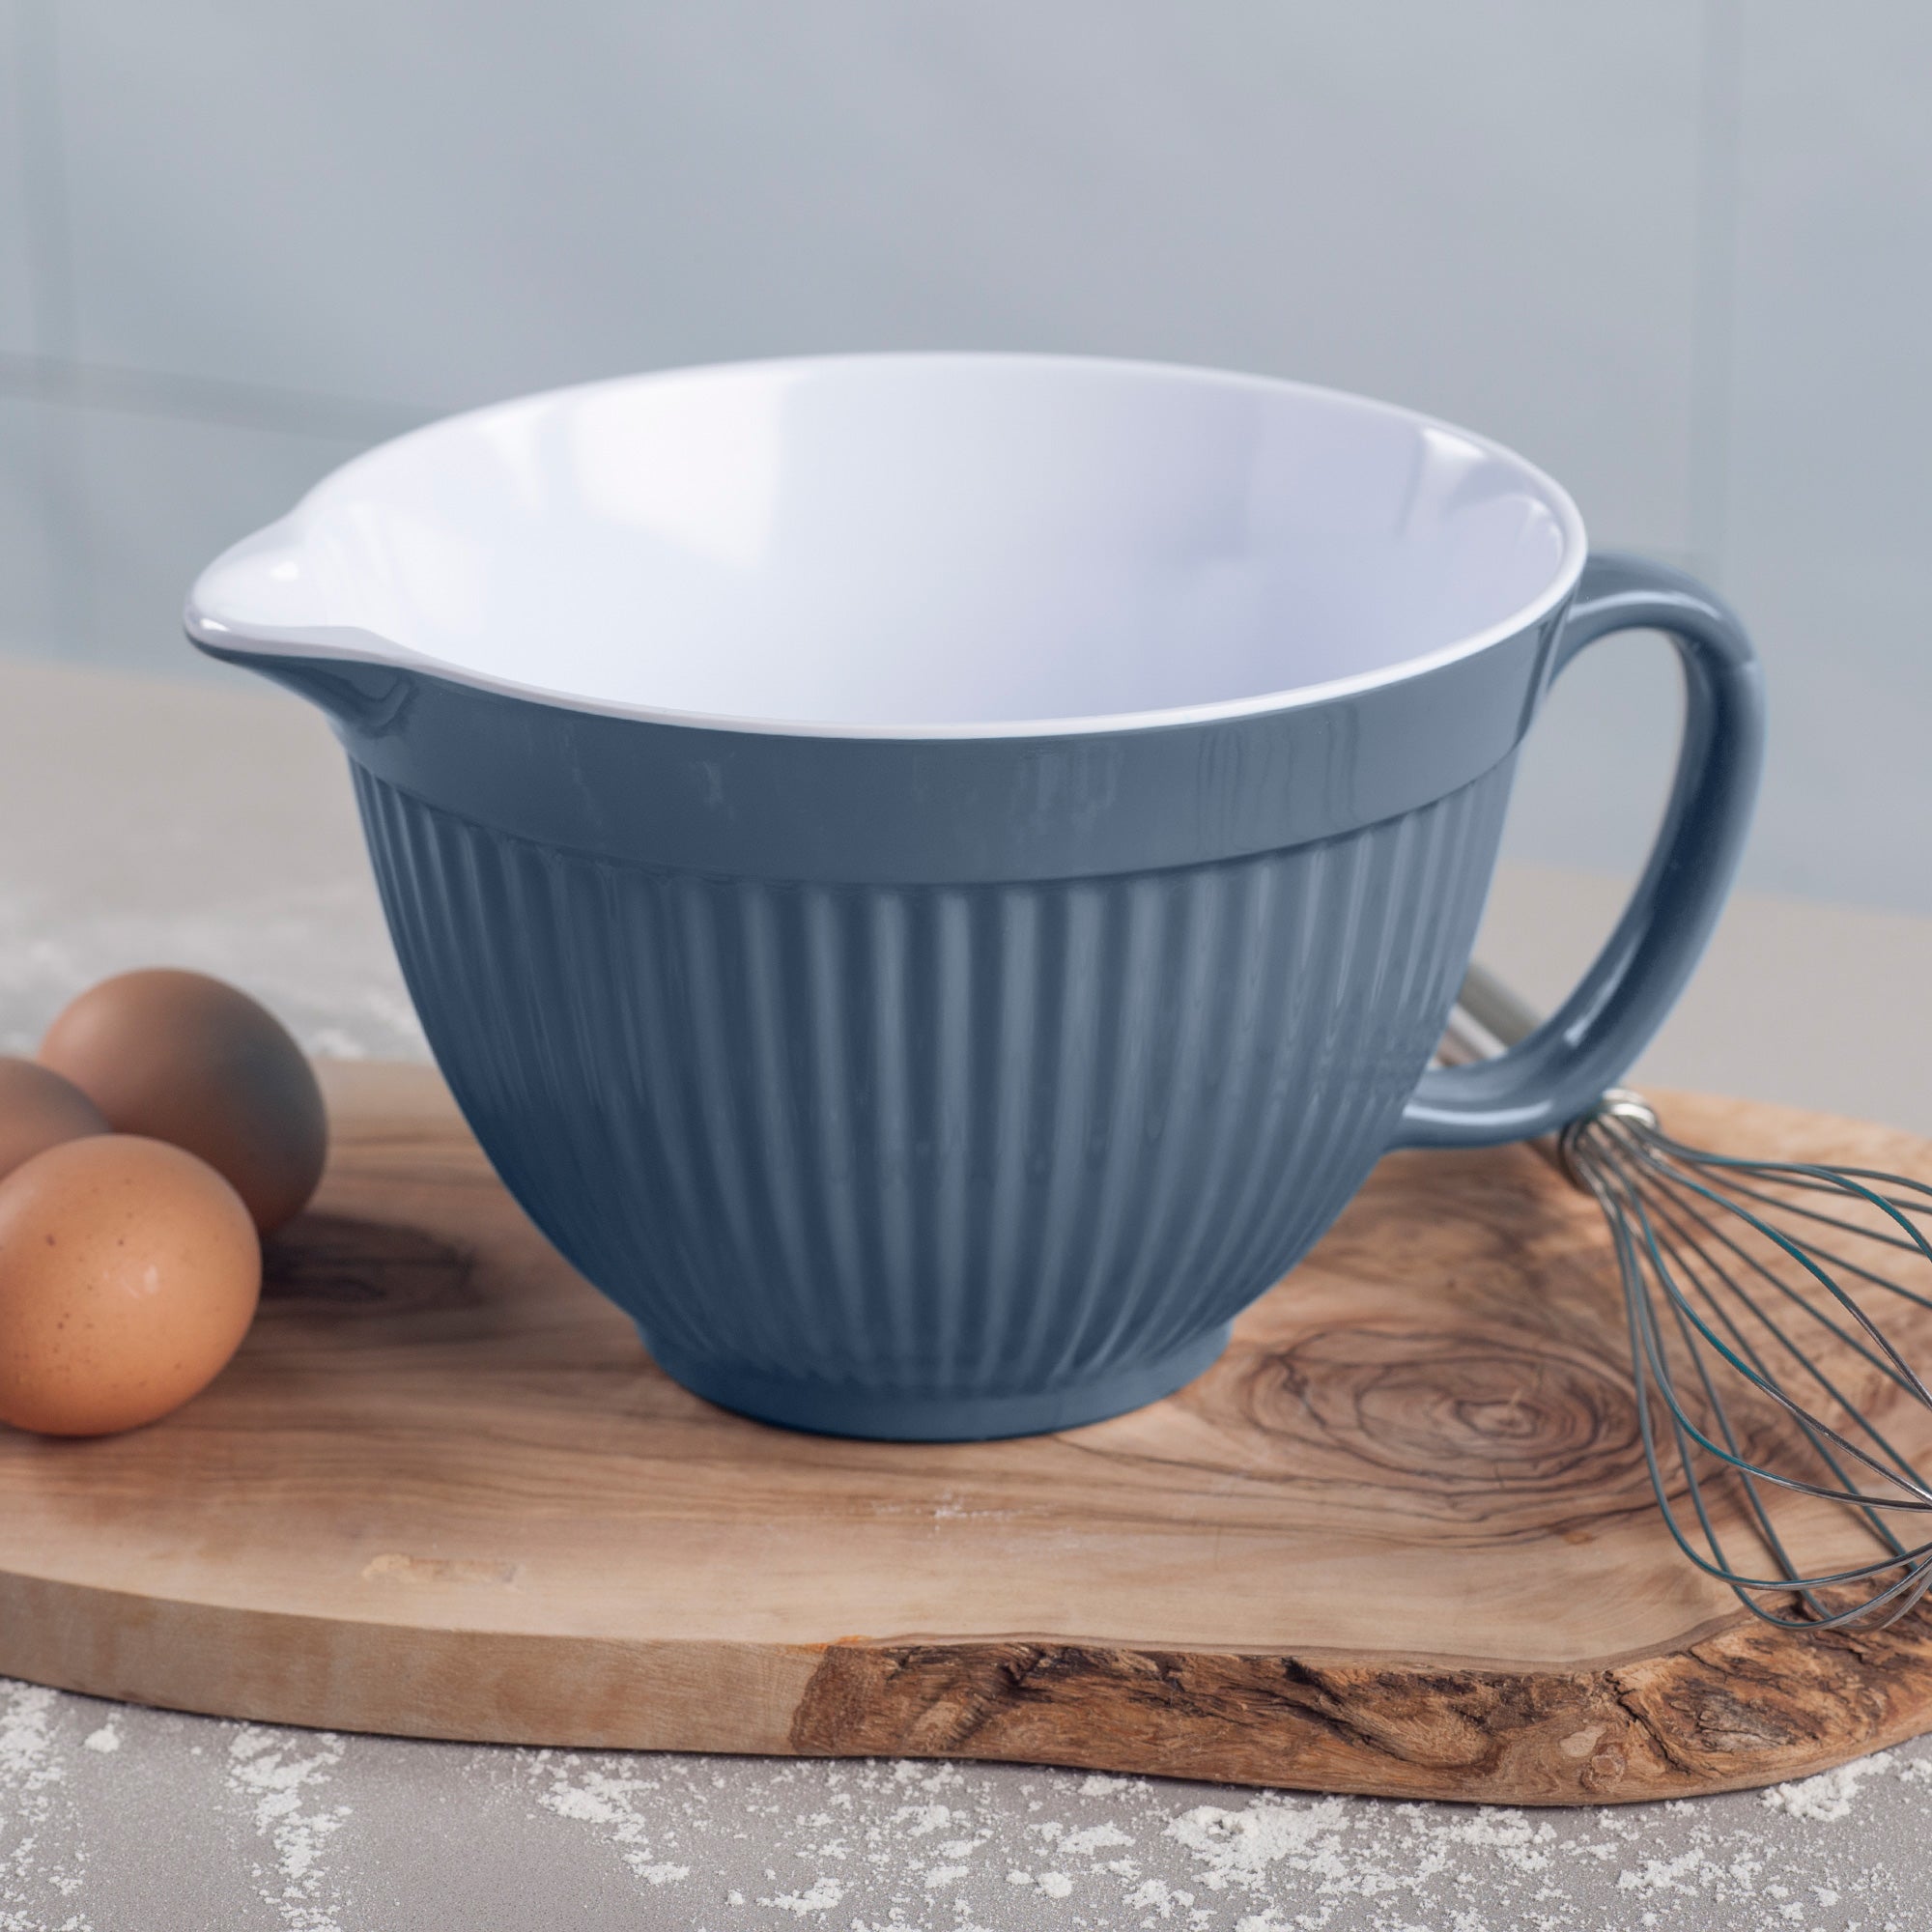 Baking using the Zeal Mixing Bowl Jug in Provence Blue